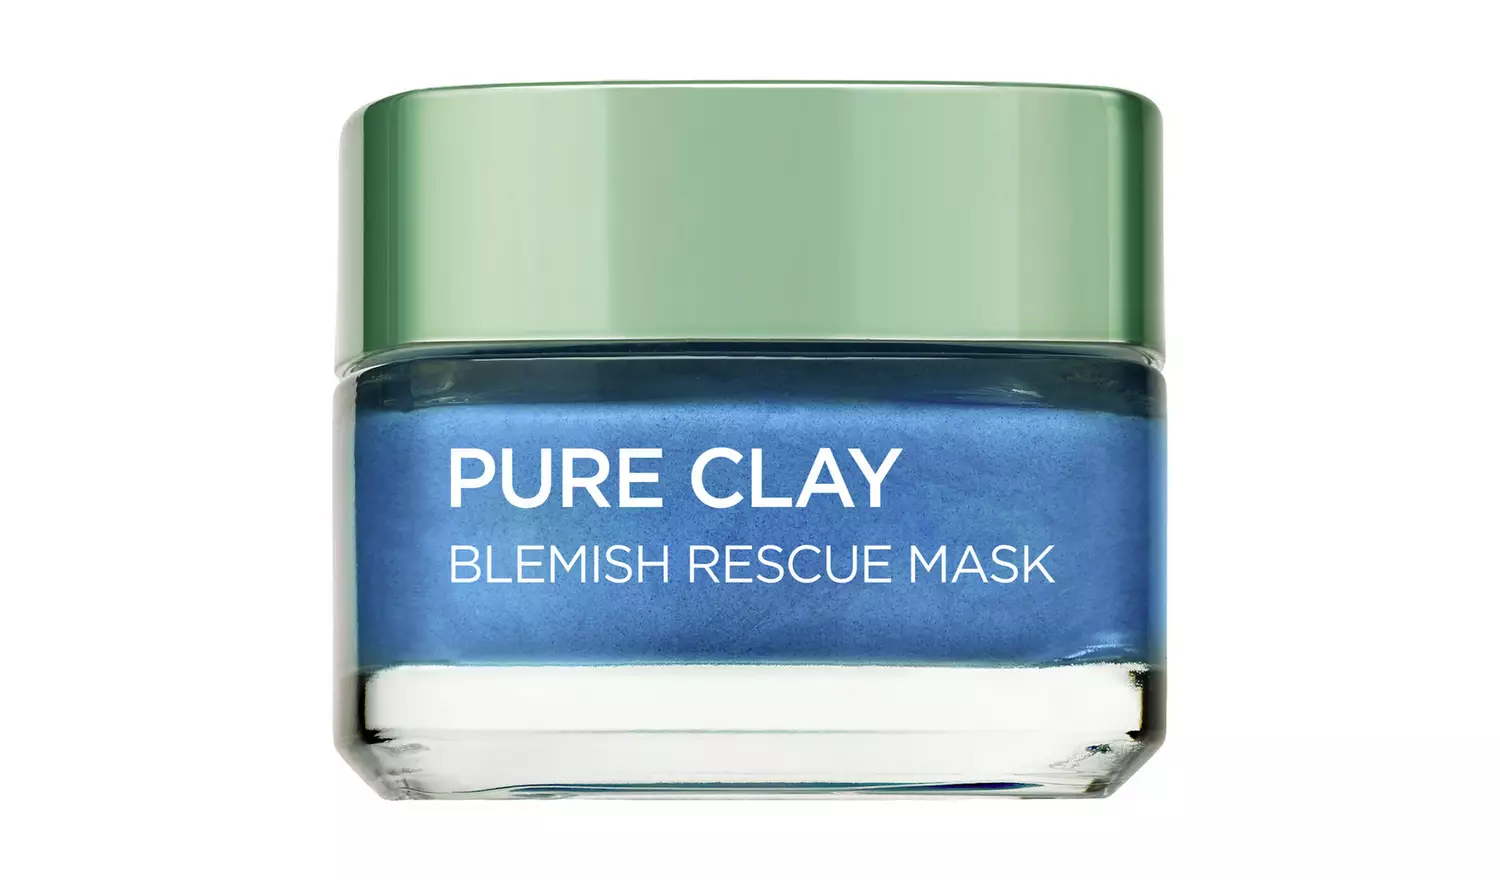 L'Oreal Pure Clay Blue Blemish Mask - 50ml